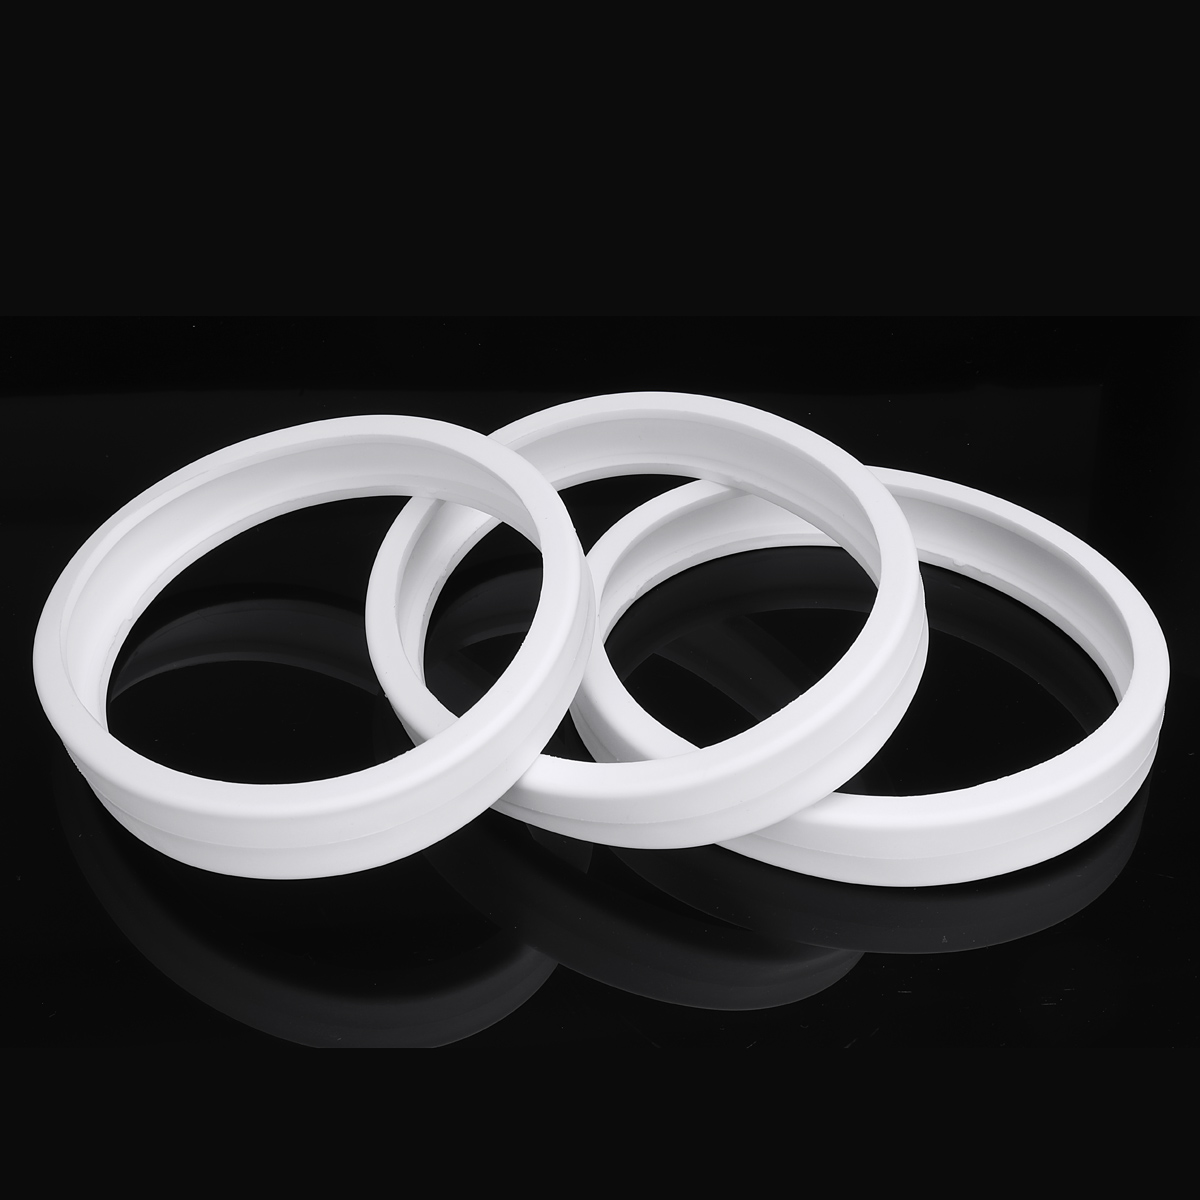 Find 3PCS Pool Cleaner All Purpose Rubber Ring Replacement For Polaris Part C10/C-10 Models 180/280/360/380 for Sale on Gipsybee.com with cryptocurrencies